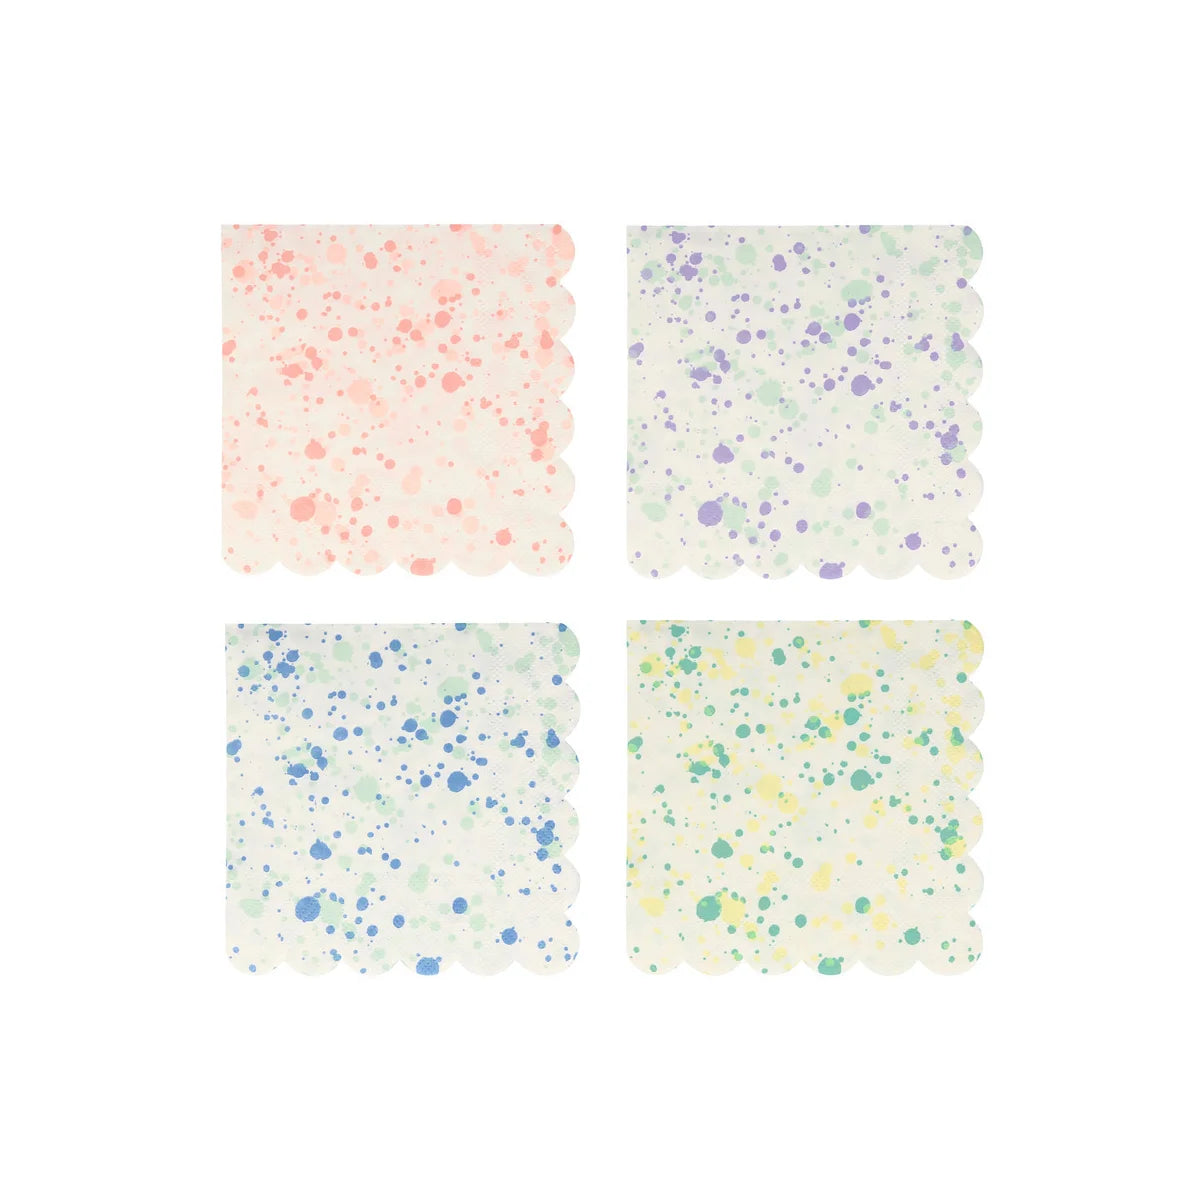 Speckled napkins in green blue purple and pink sold at ALittleConfetti, by Meri Meri